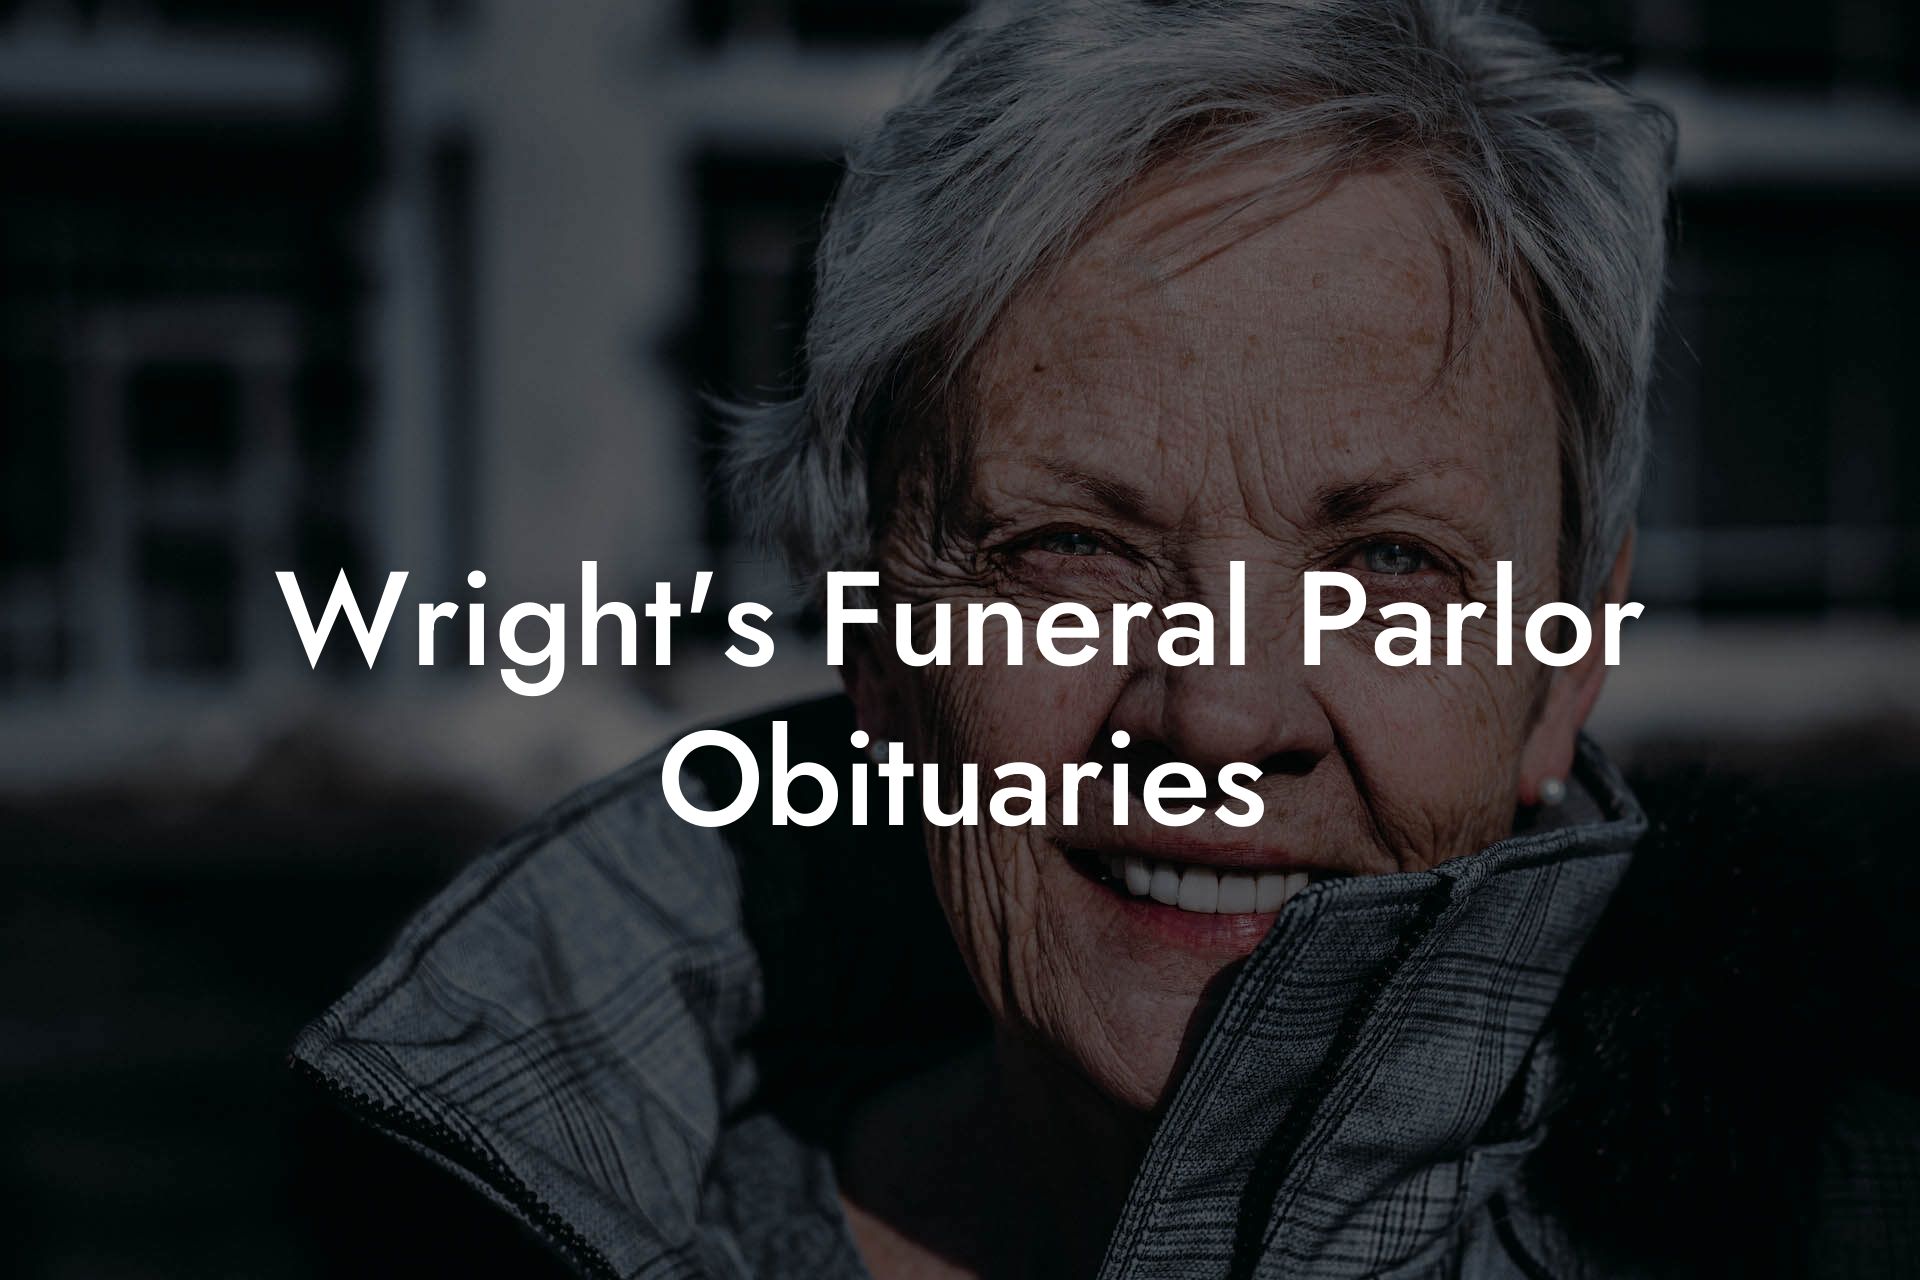 Wright's Funeral Parlor Obituaries